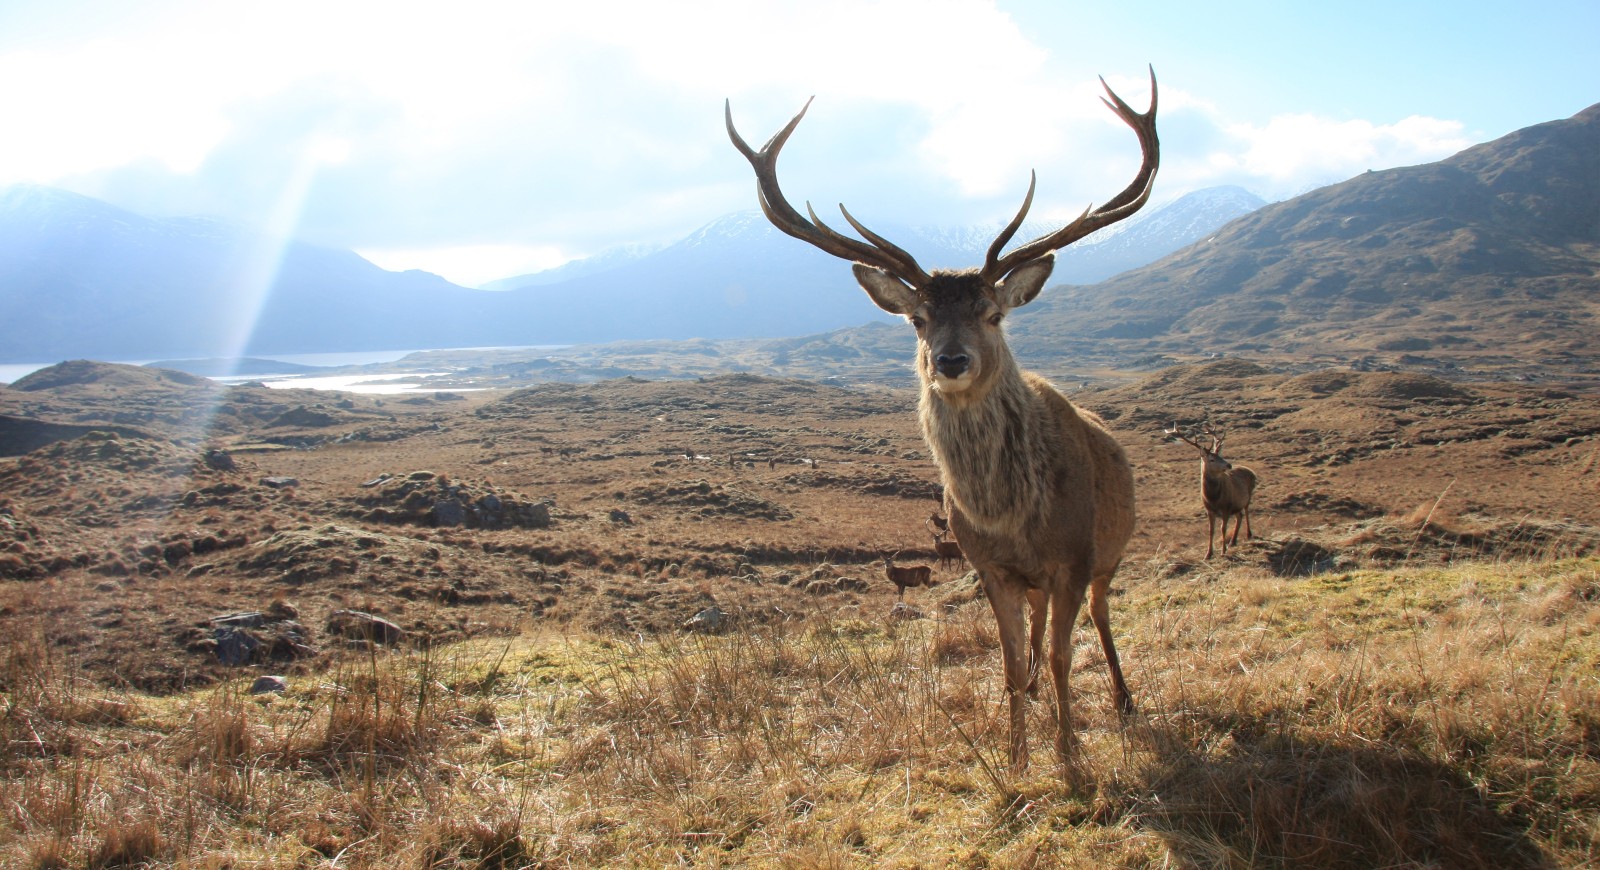 A photo of a wild stag standing on a mountain with blue sky behind it.